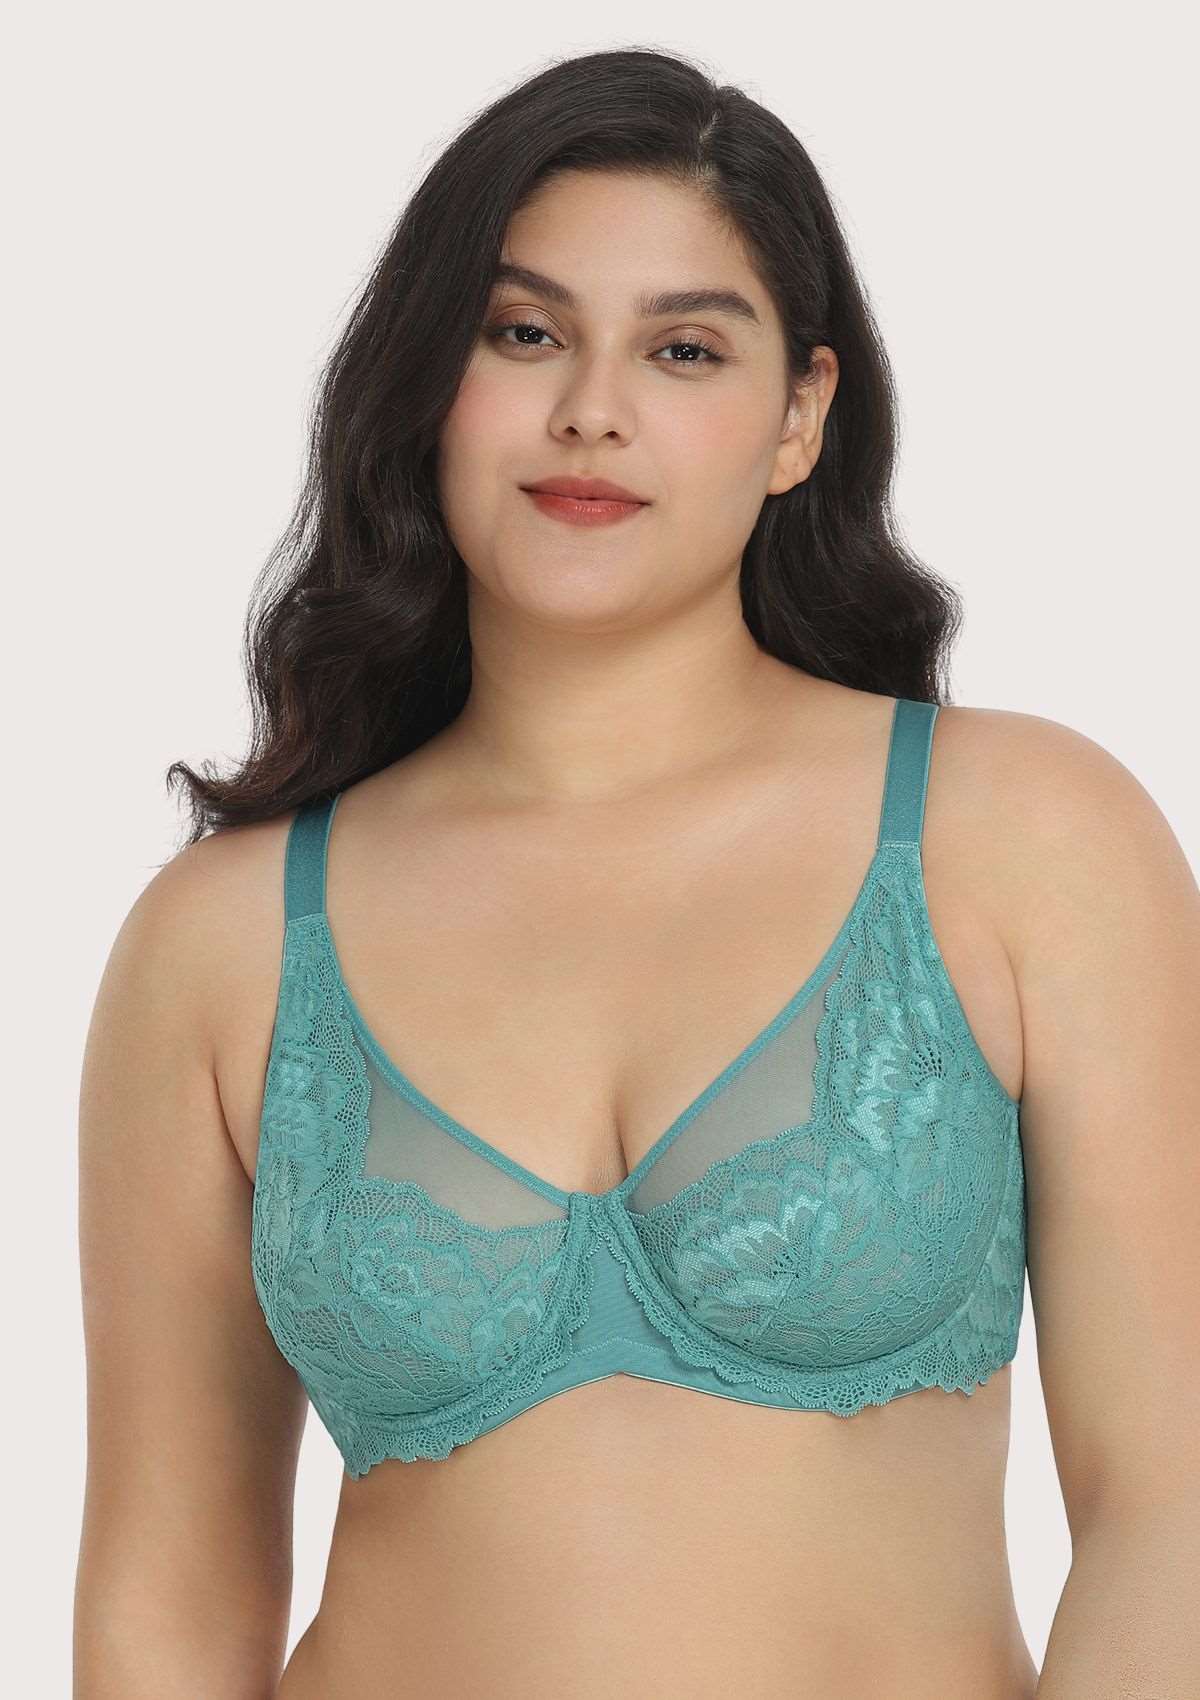 NWT Cacique Bra 44 H Full Coverage - Green Lace Invisible Back